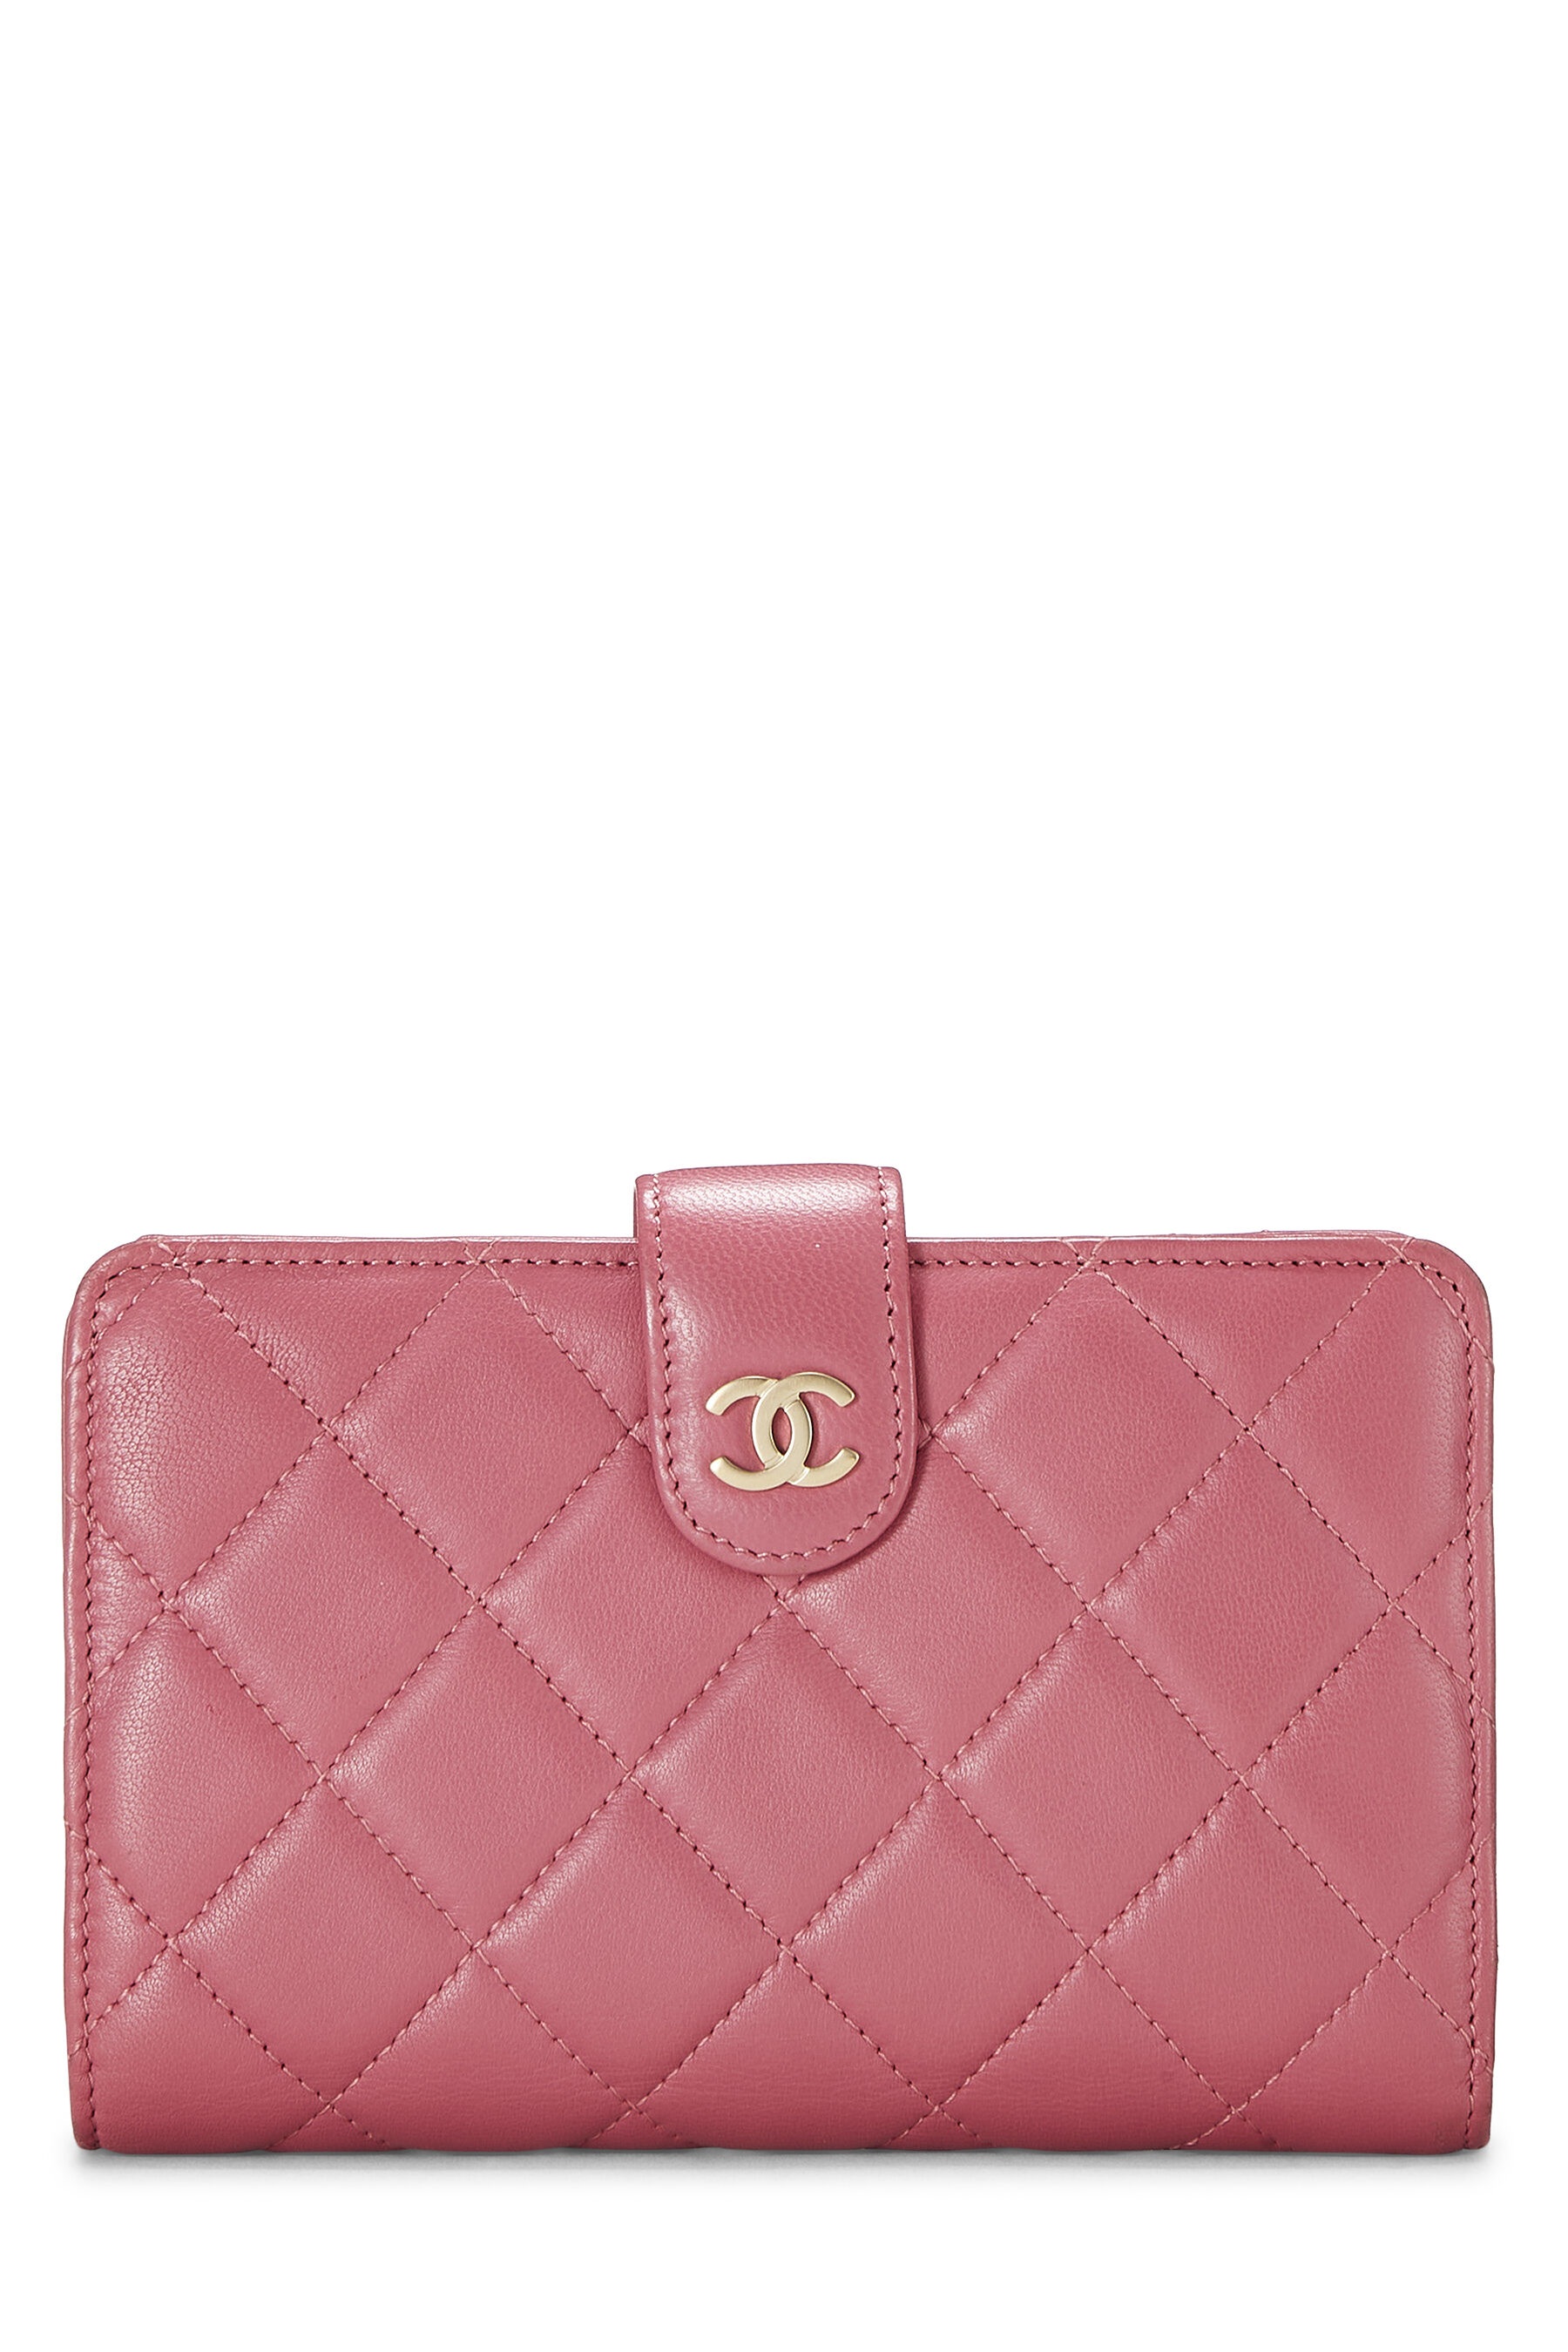 Chanel - Pink Quilted Lambskin Wallet